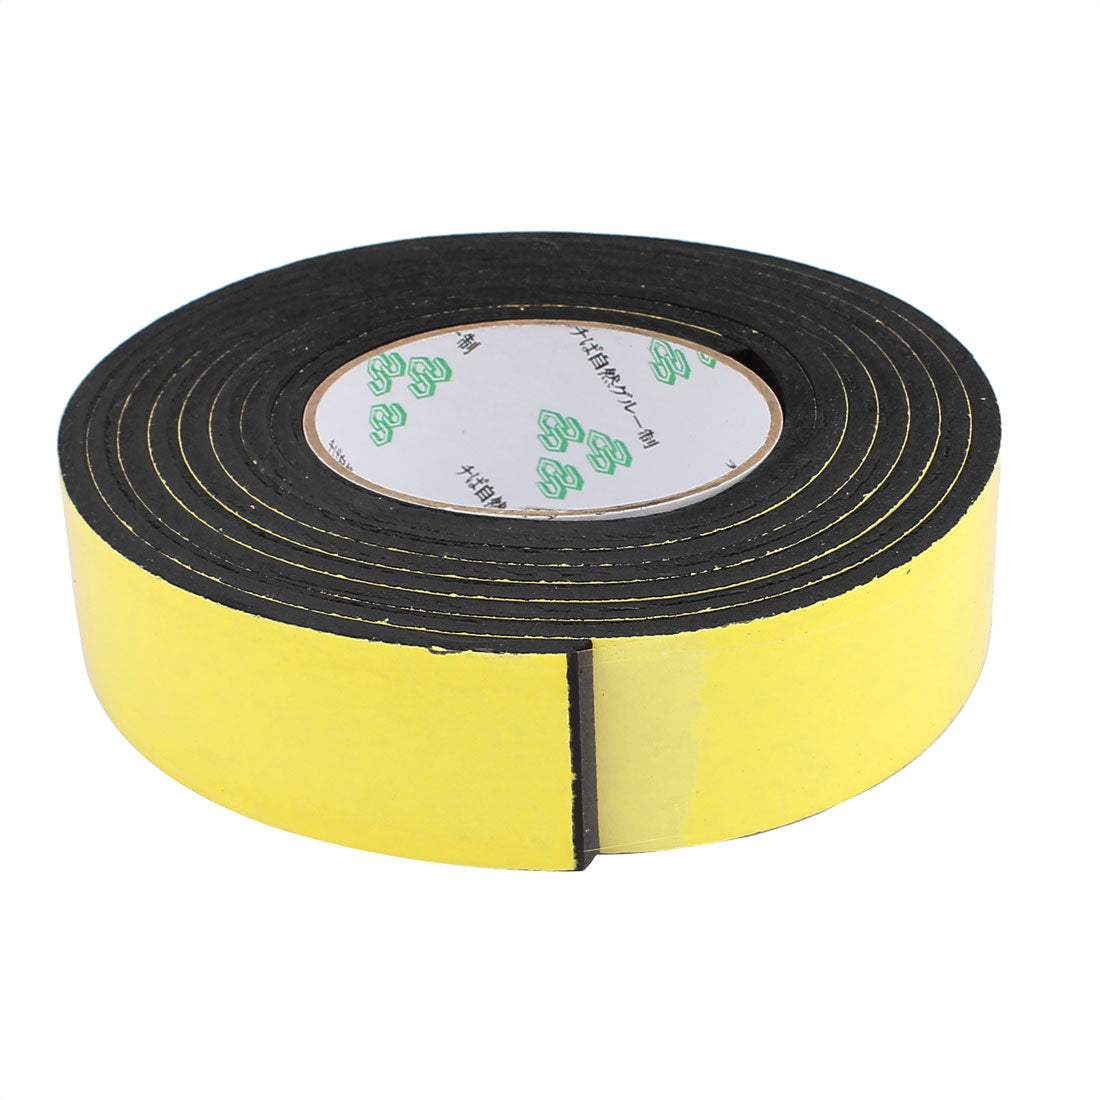 uxcell Uxcell 40mm x 5mm Single Sided Self Adhesive Shockproof Sponge Foam Tape 3 Meters